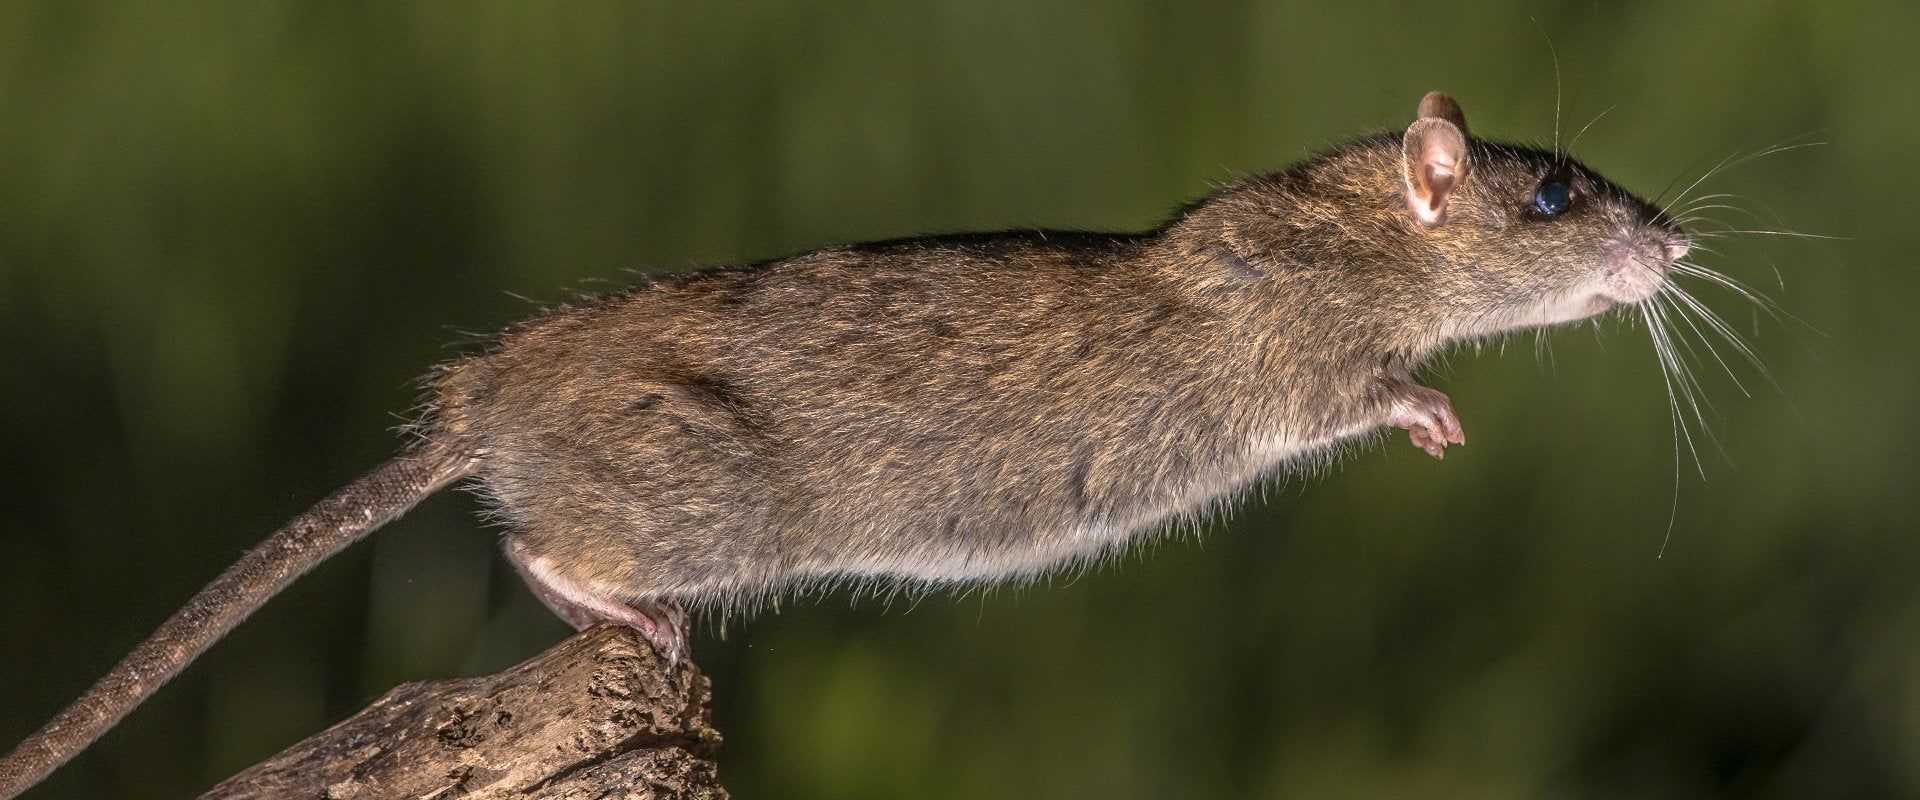 rodent leaping  in south florida